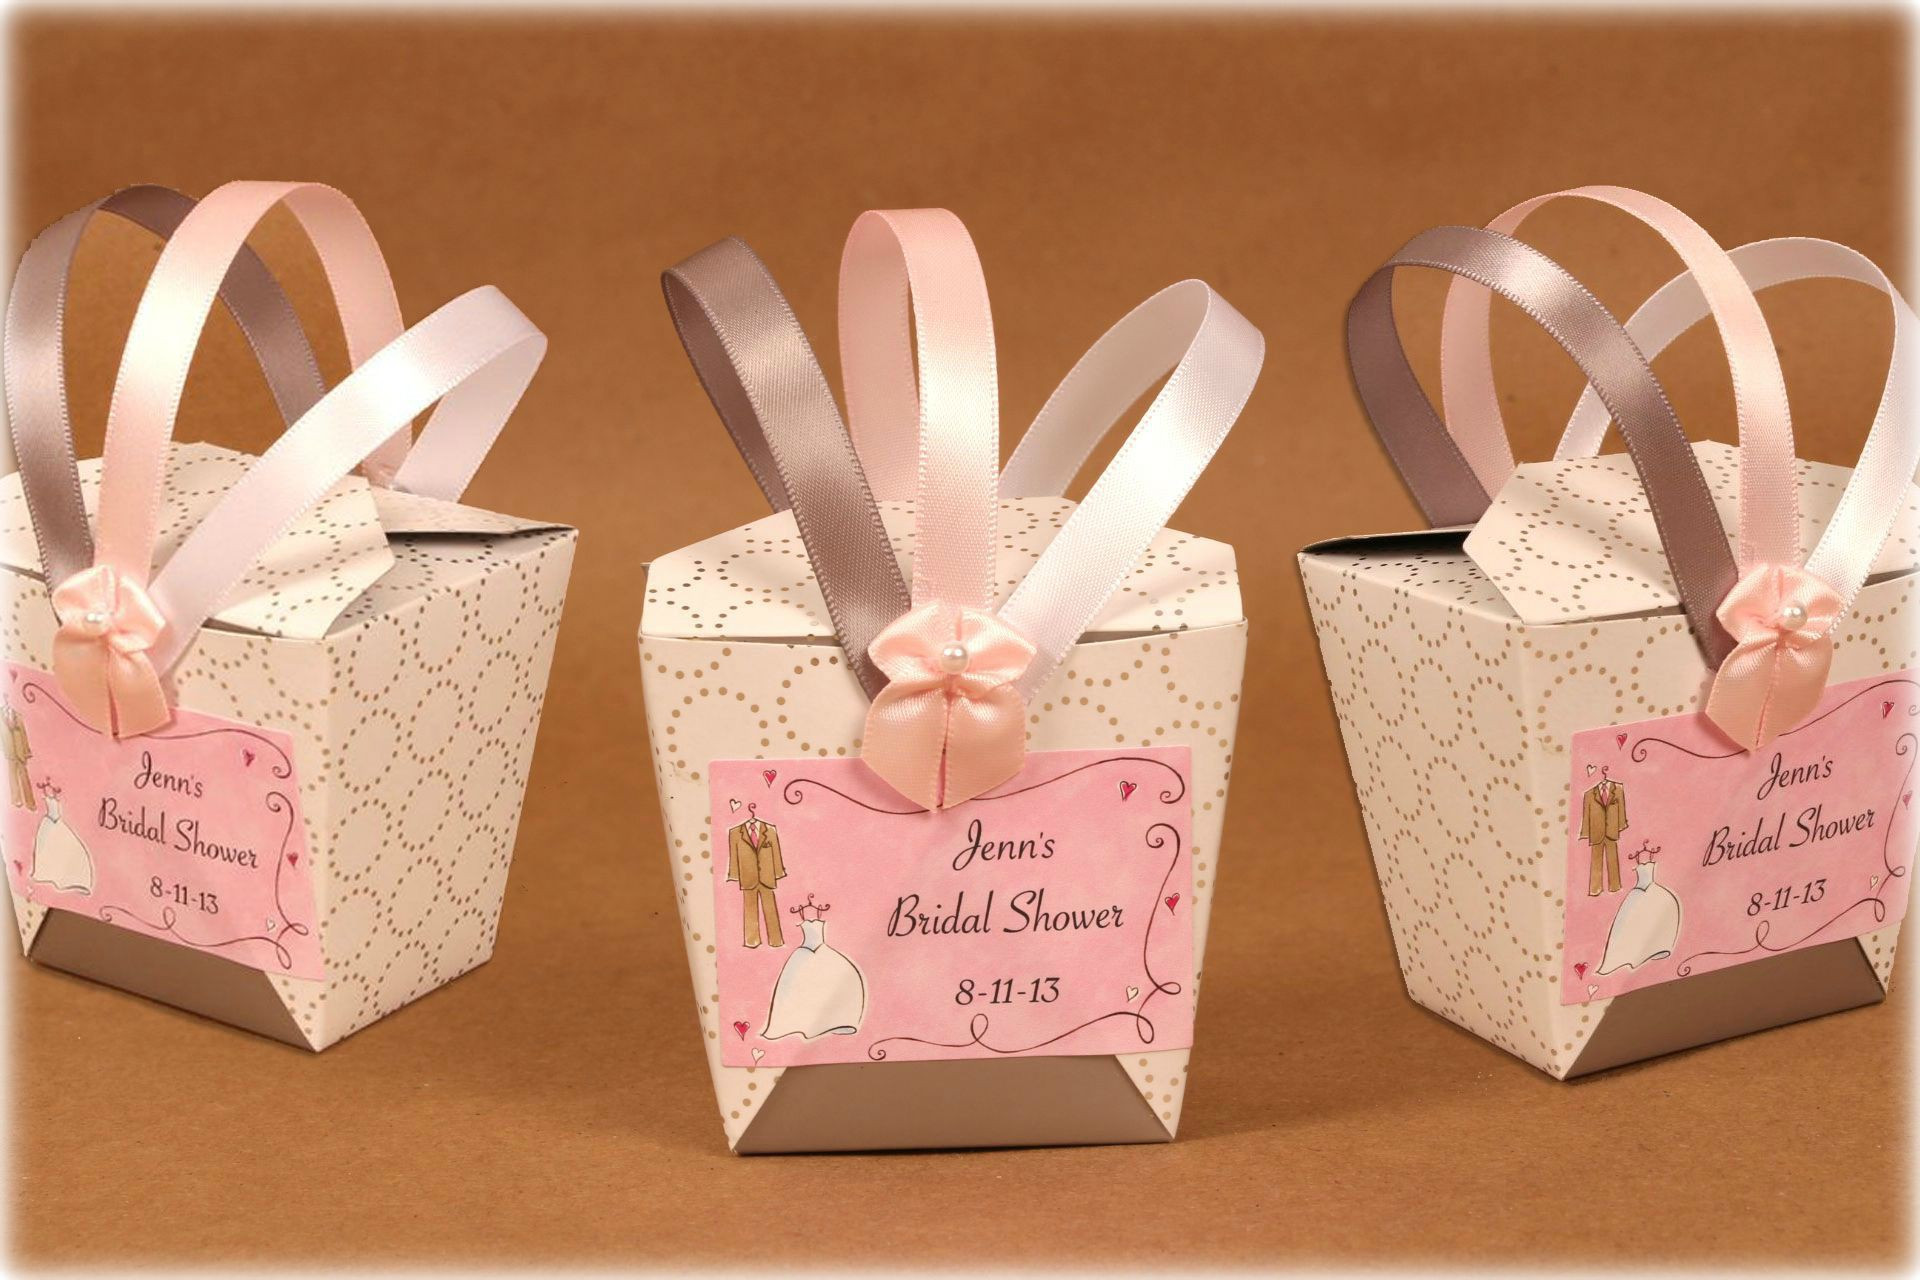 Wedding Shower Favor Ideas
 Bridal Shower Favor Chinese Takeout Style Boxes